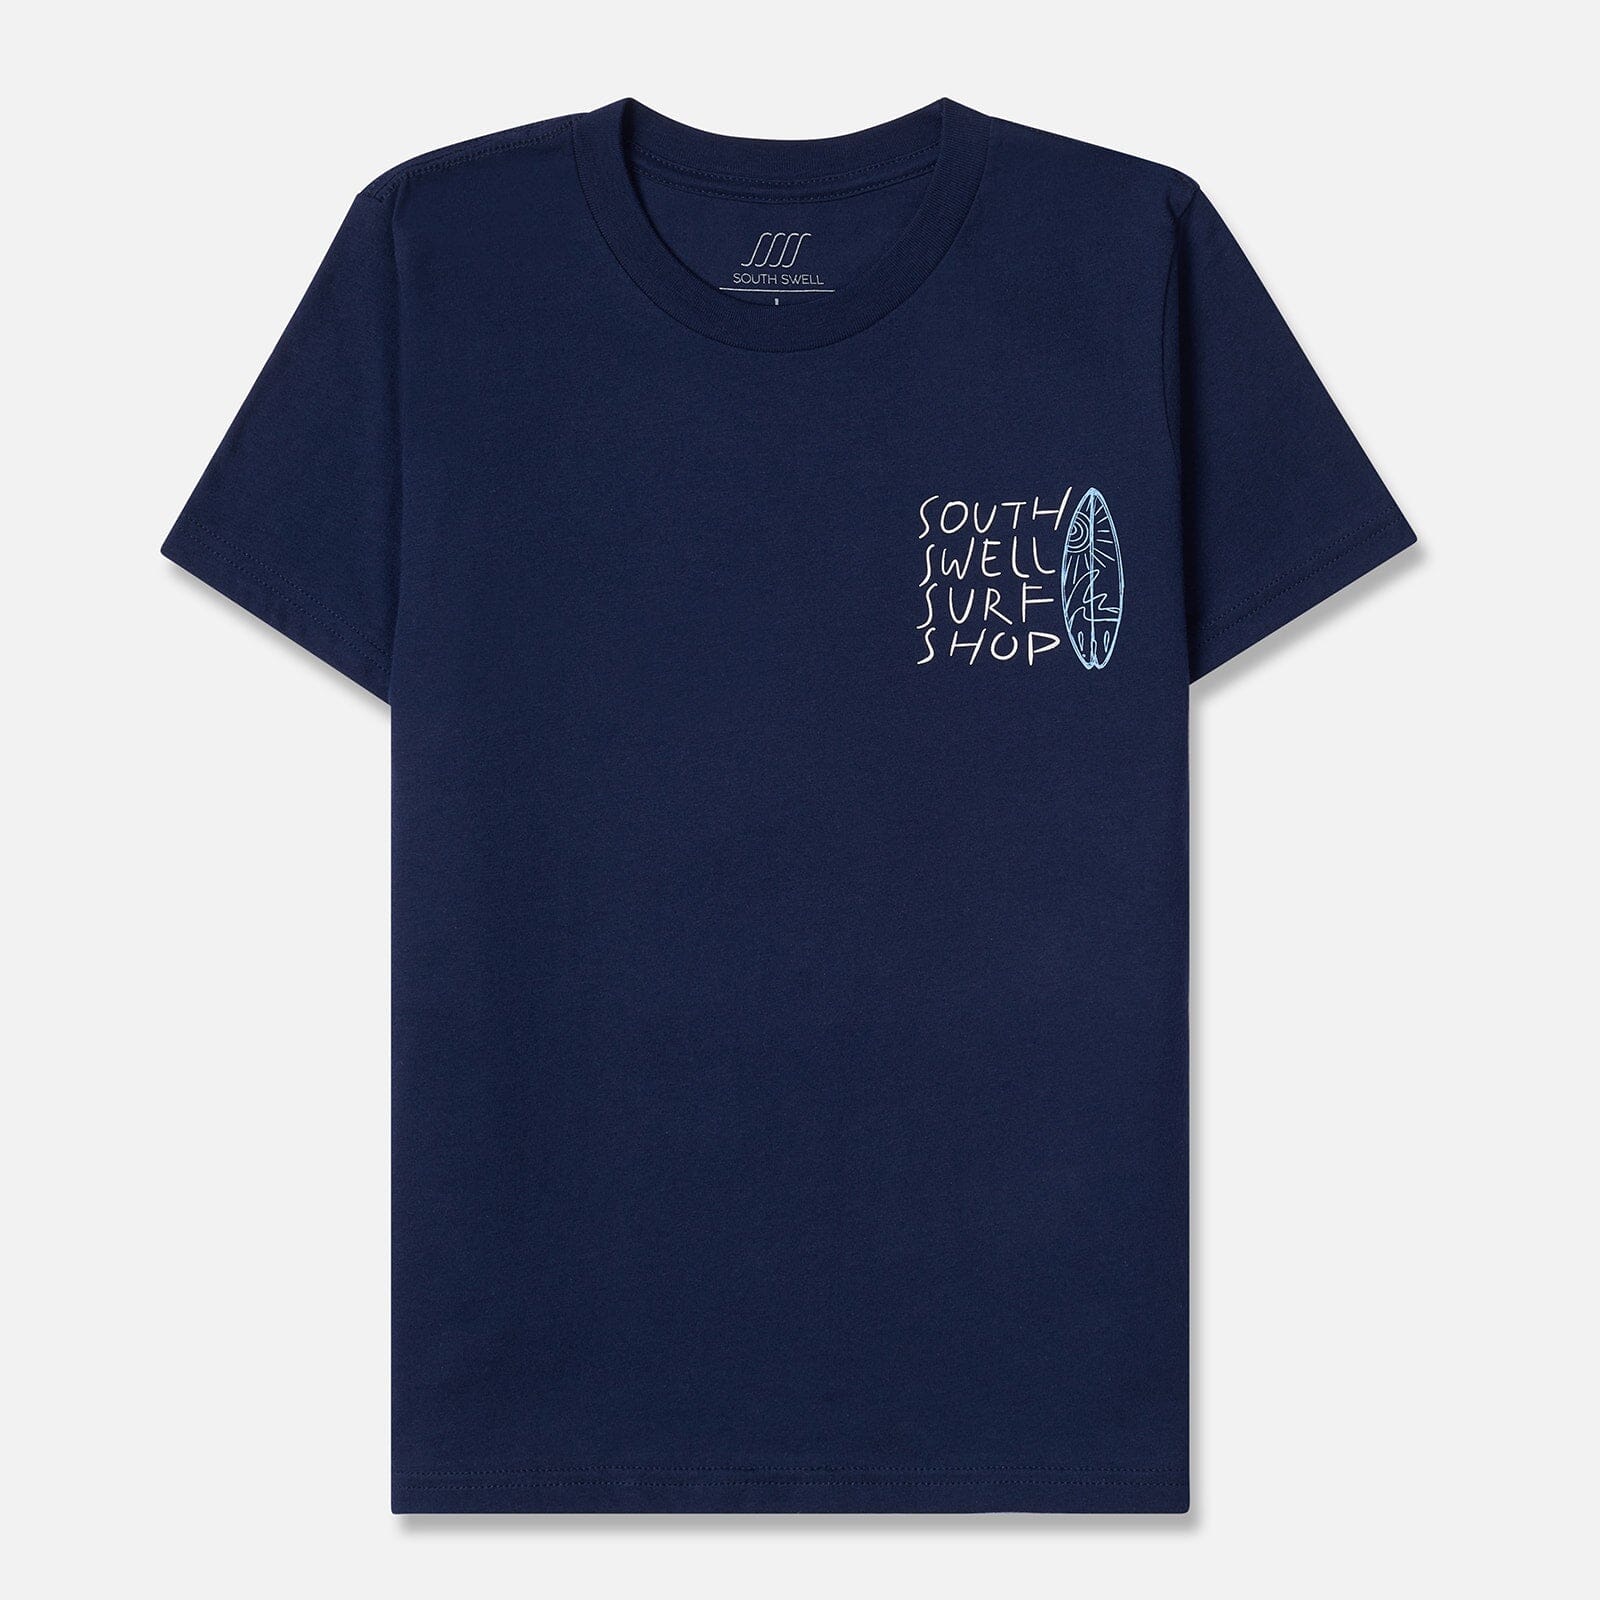 South Swell Youth Grom Shortsleeve Navy SOUTH SWELL 